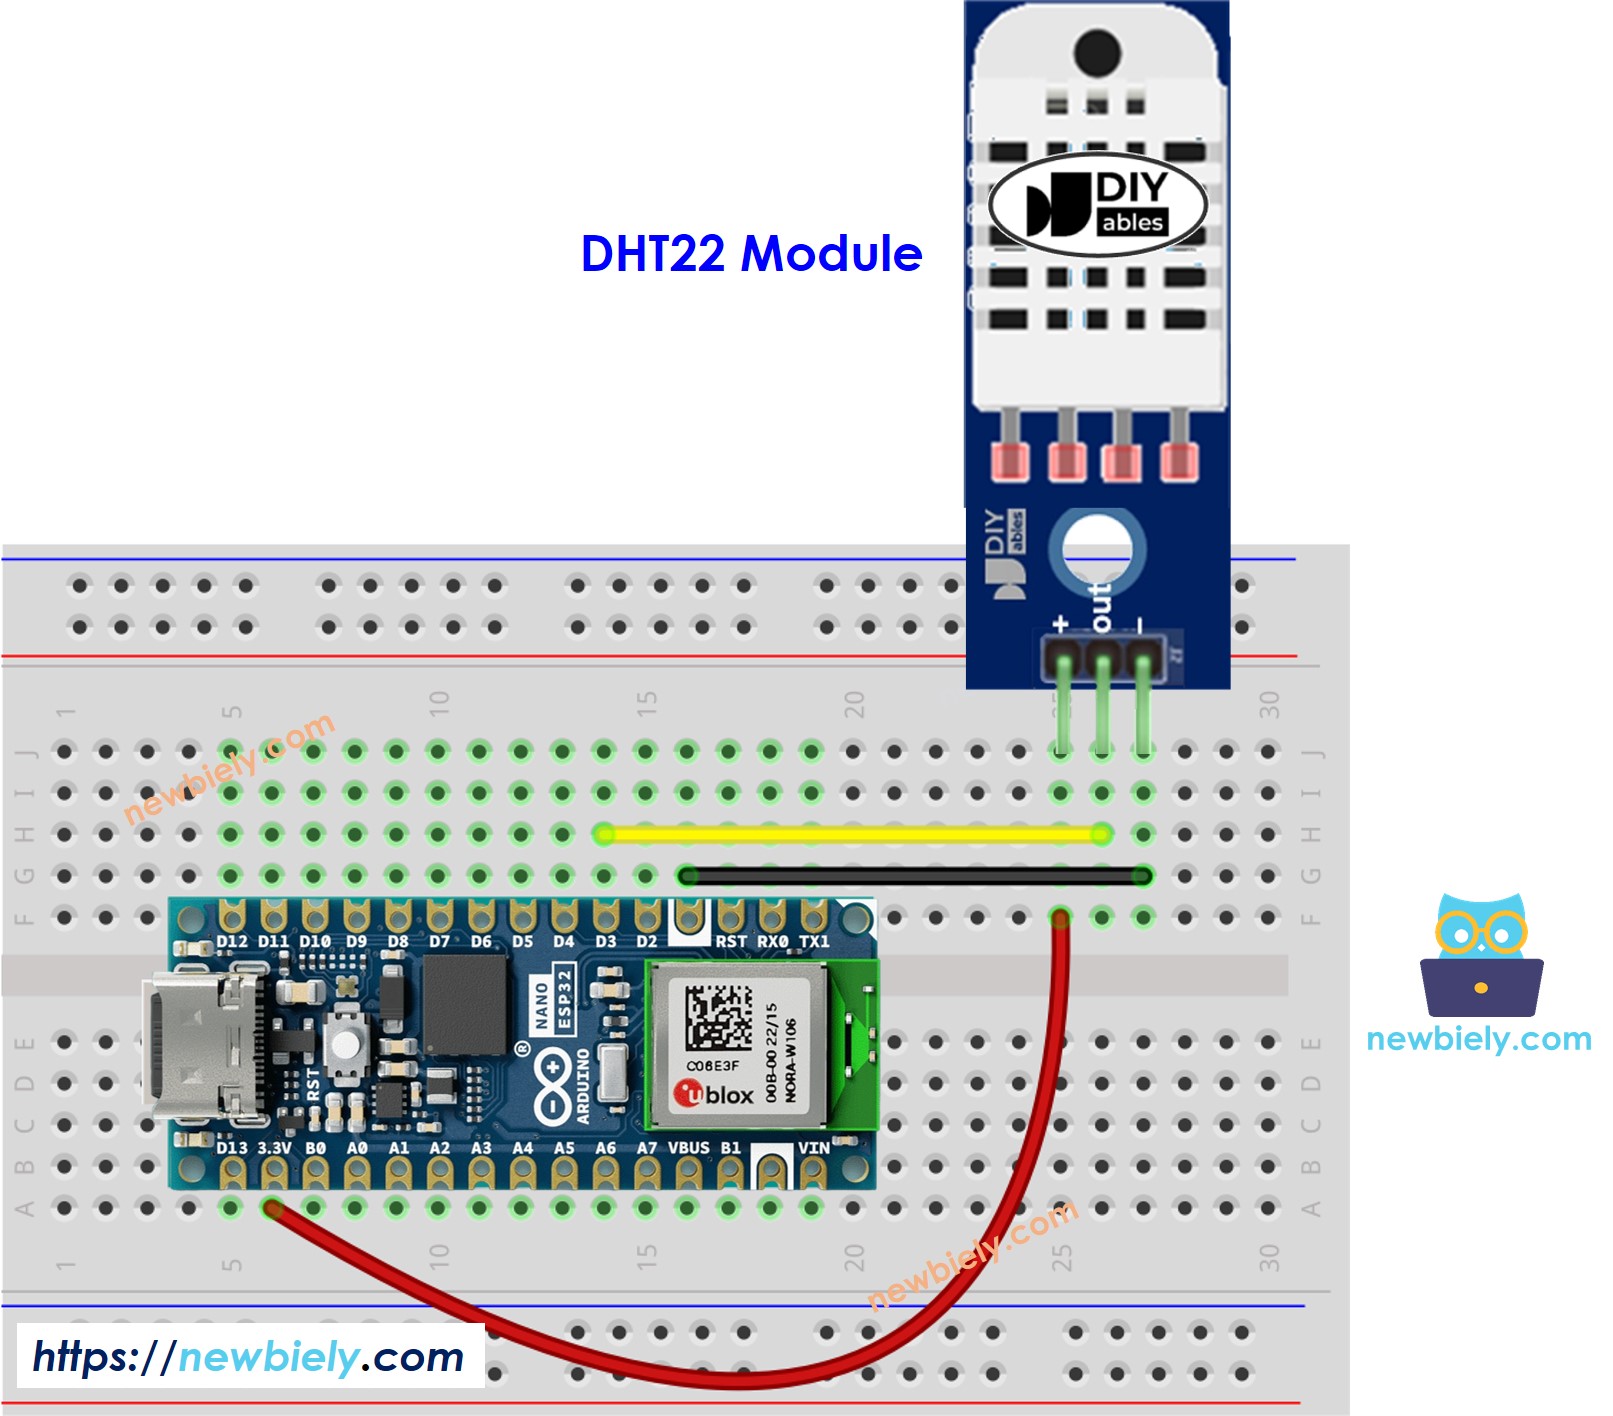 The wiring diagram between Arduino Nano ESP32 and DHT22 Temperature and humidity Module